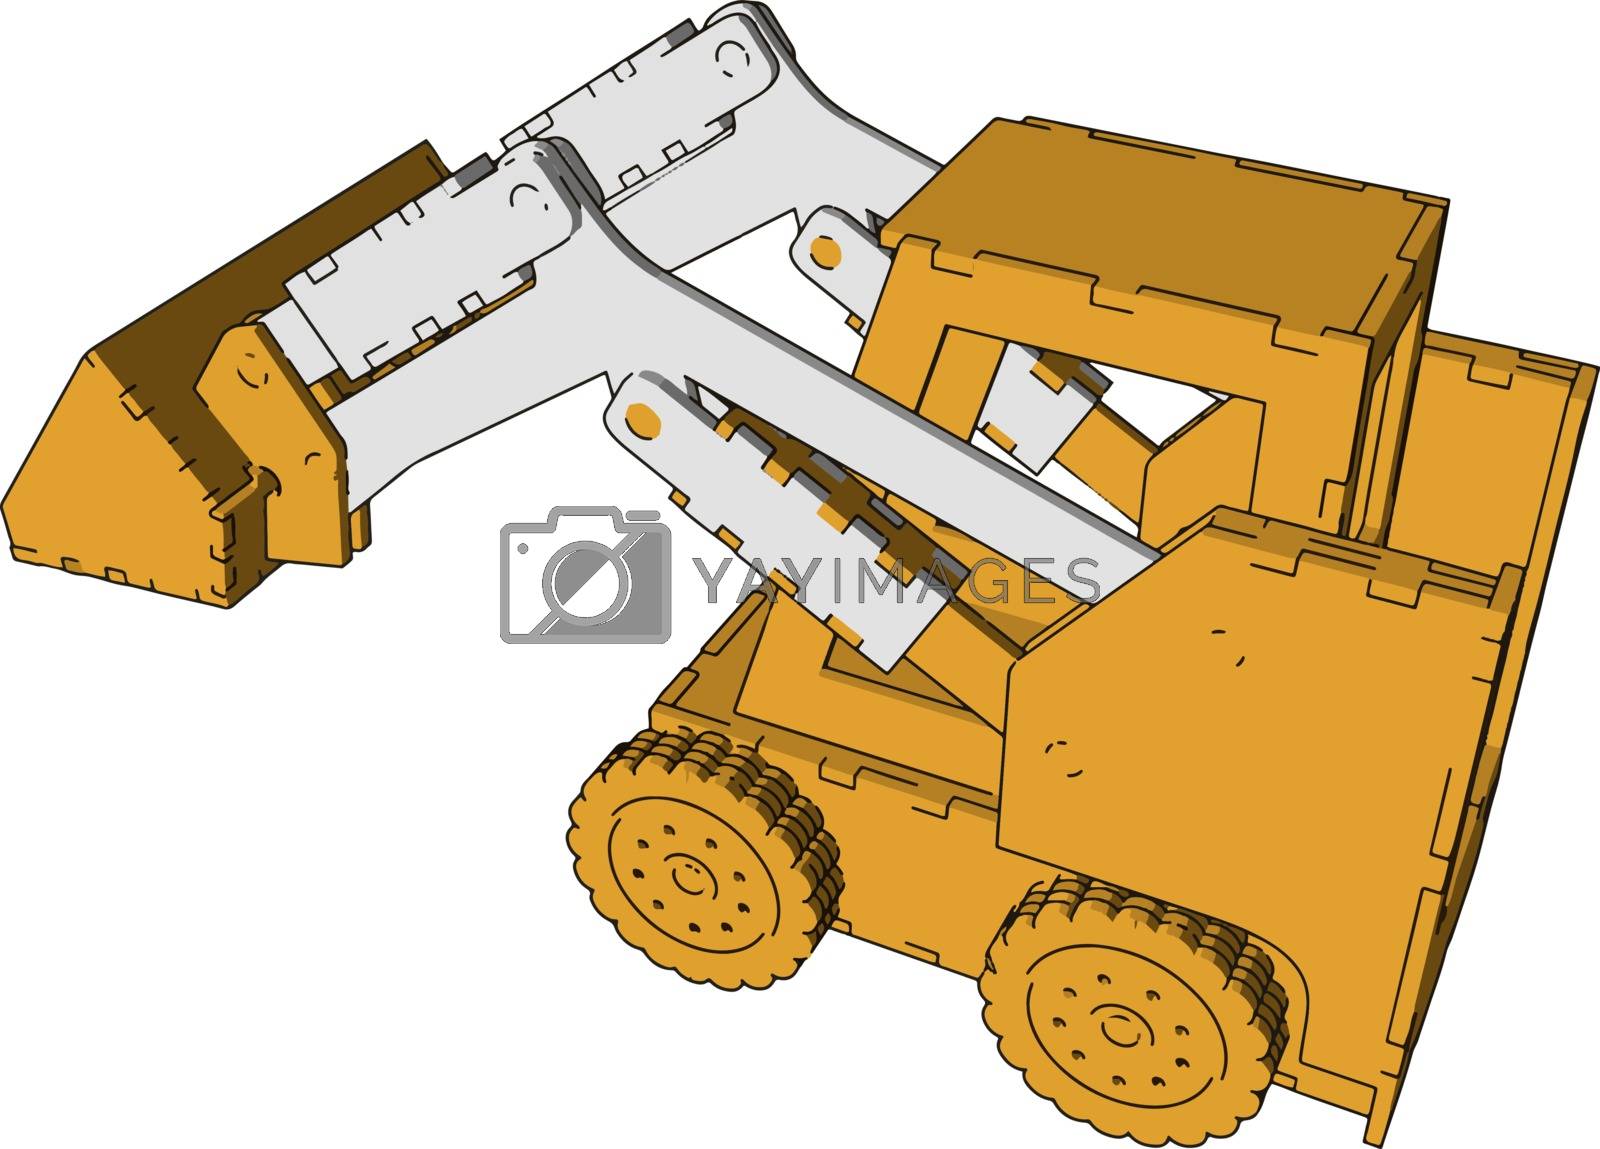 Royalty free image of Yellow excavator toy, illustration, vector on white background. by Morphart